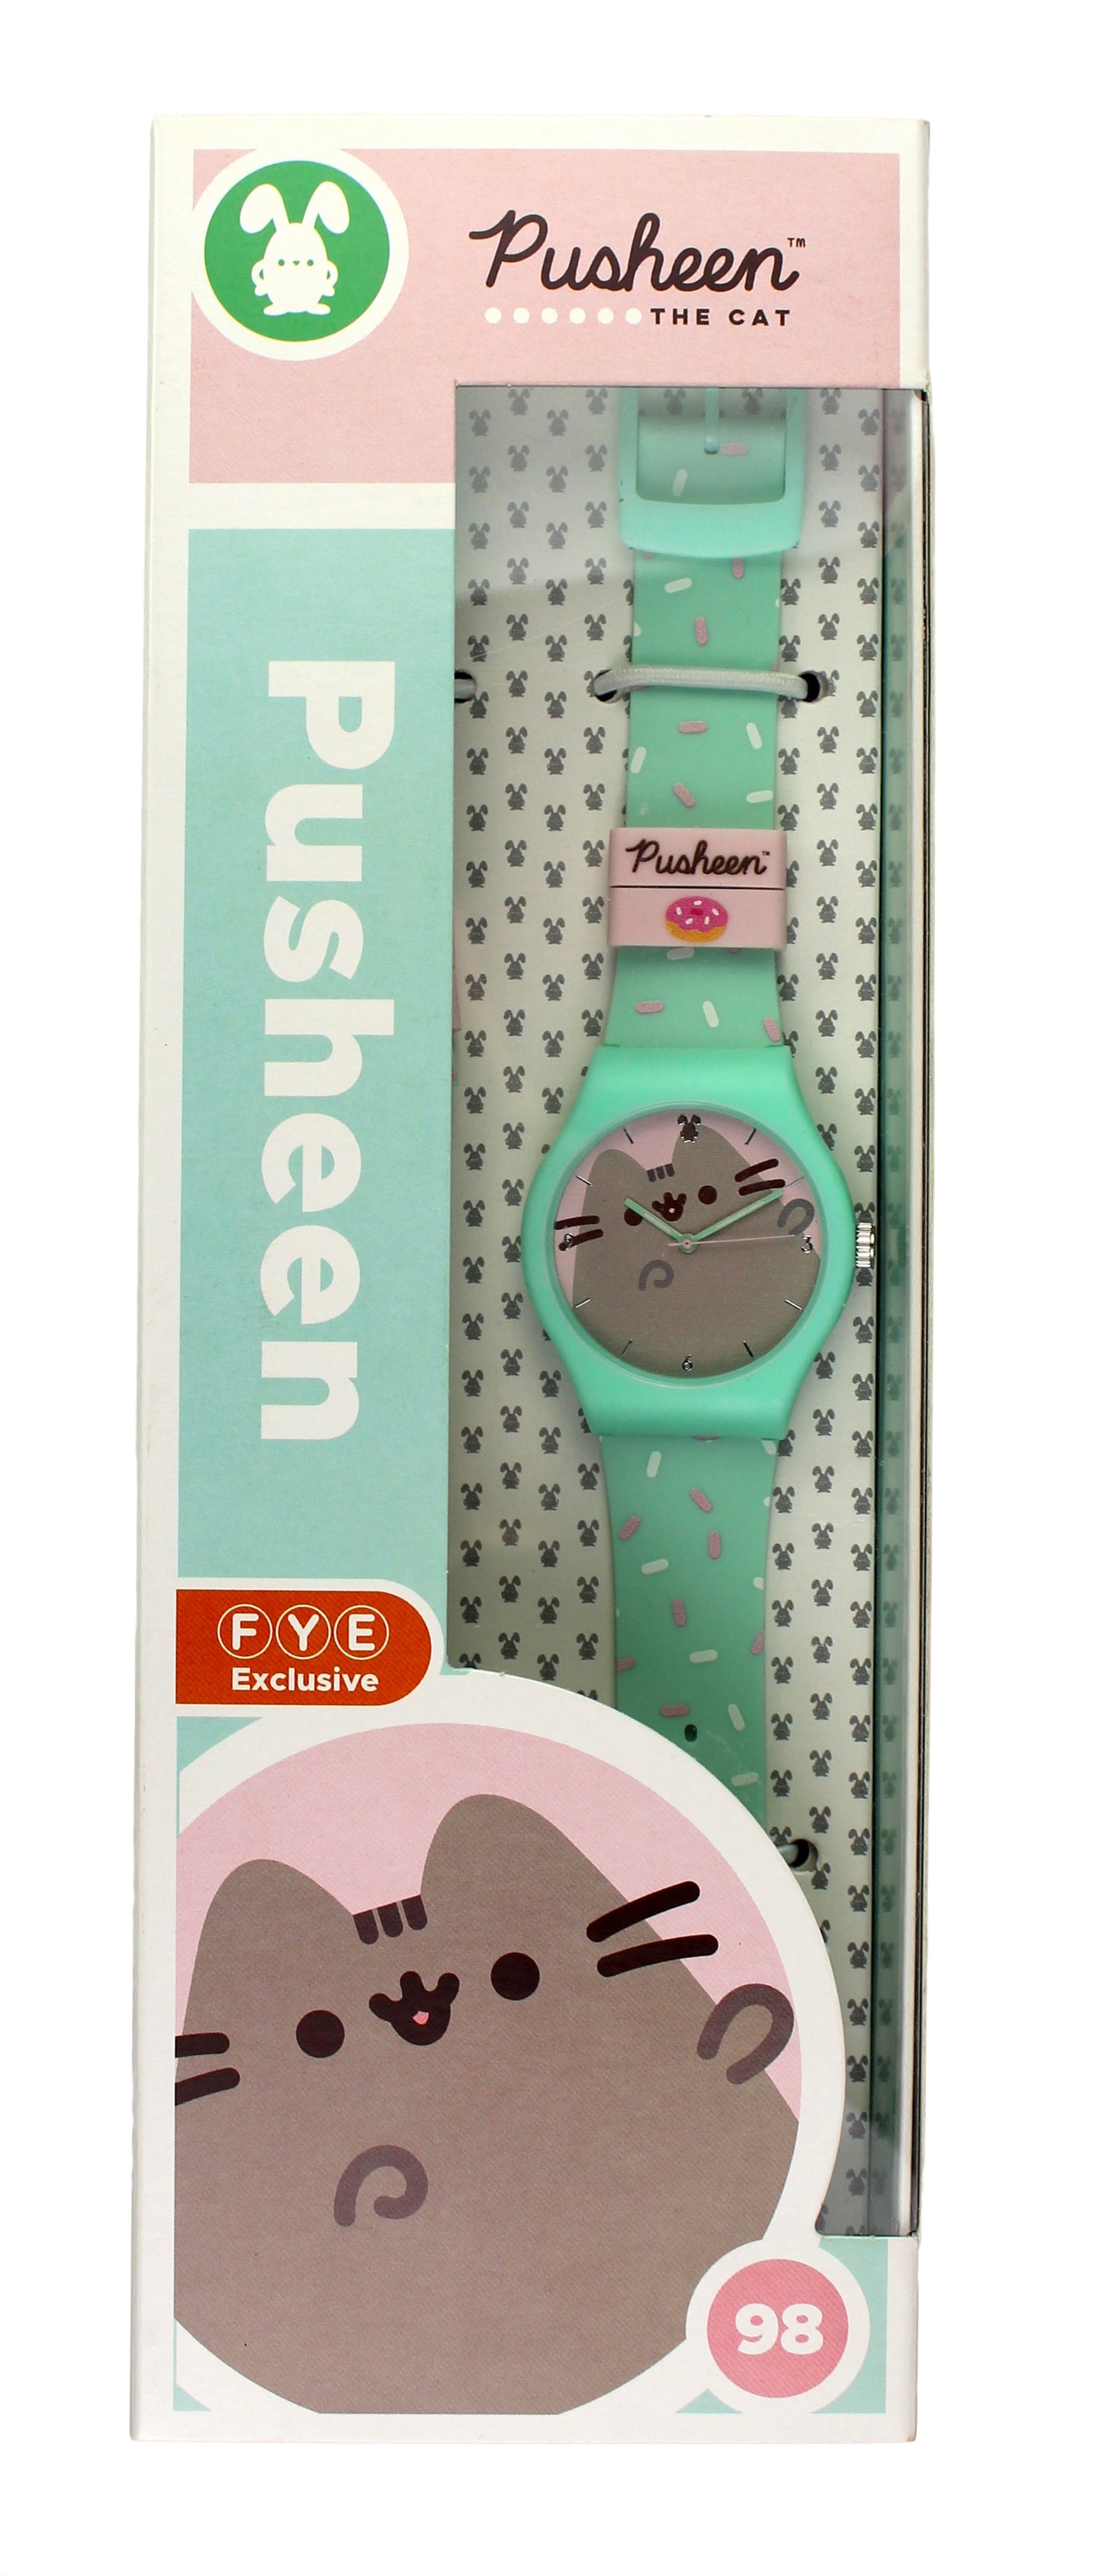 Pusheen Limited Edition Watch